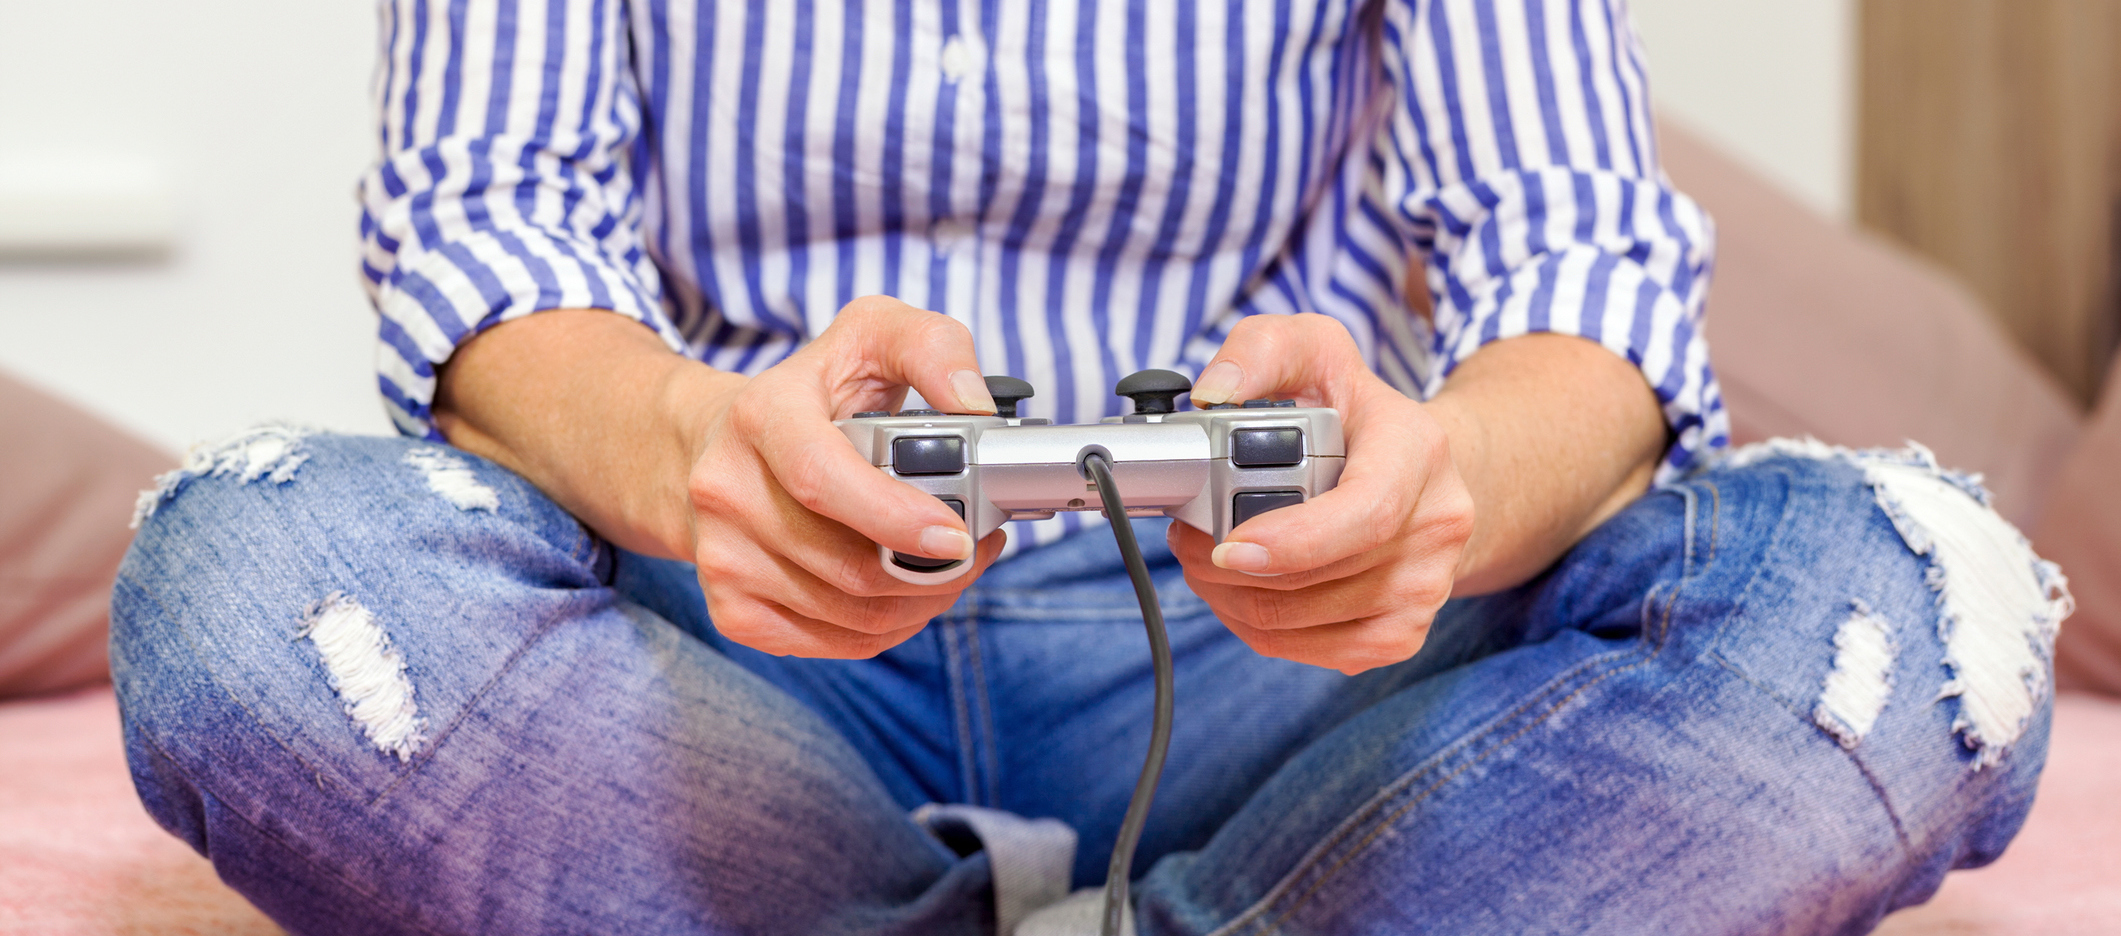 woman playing video game and holding a controller while sitting cross legged on her bed